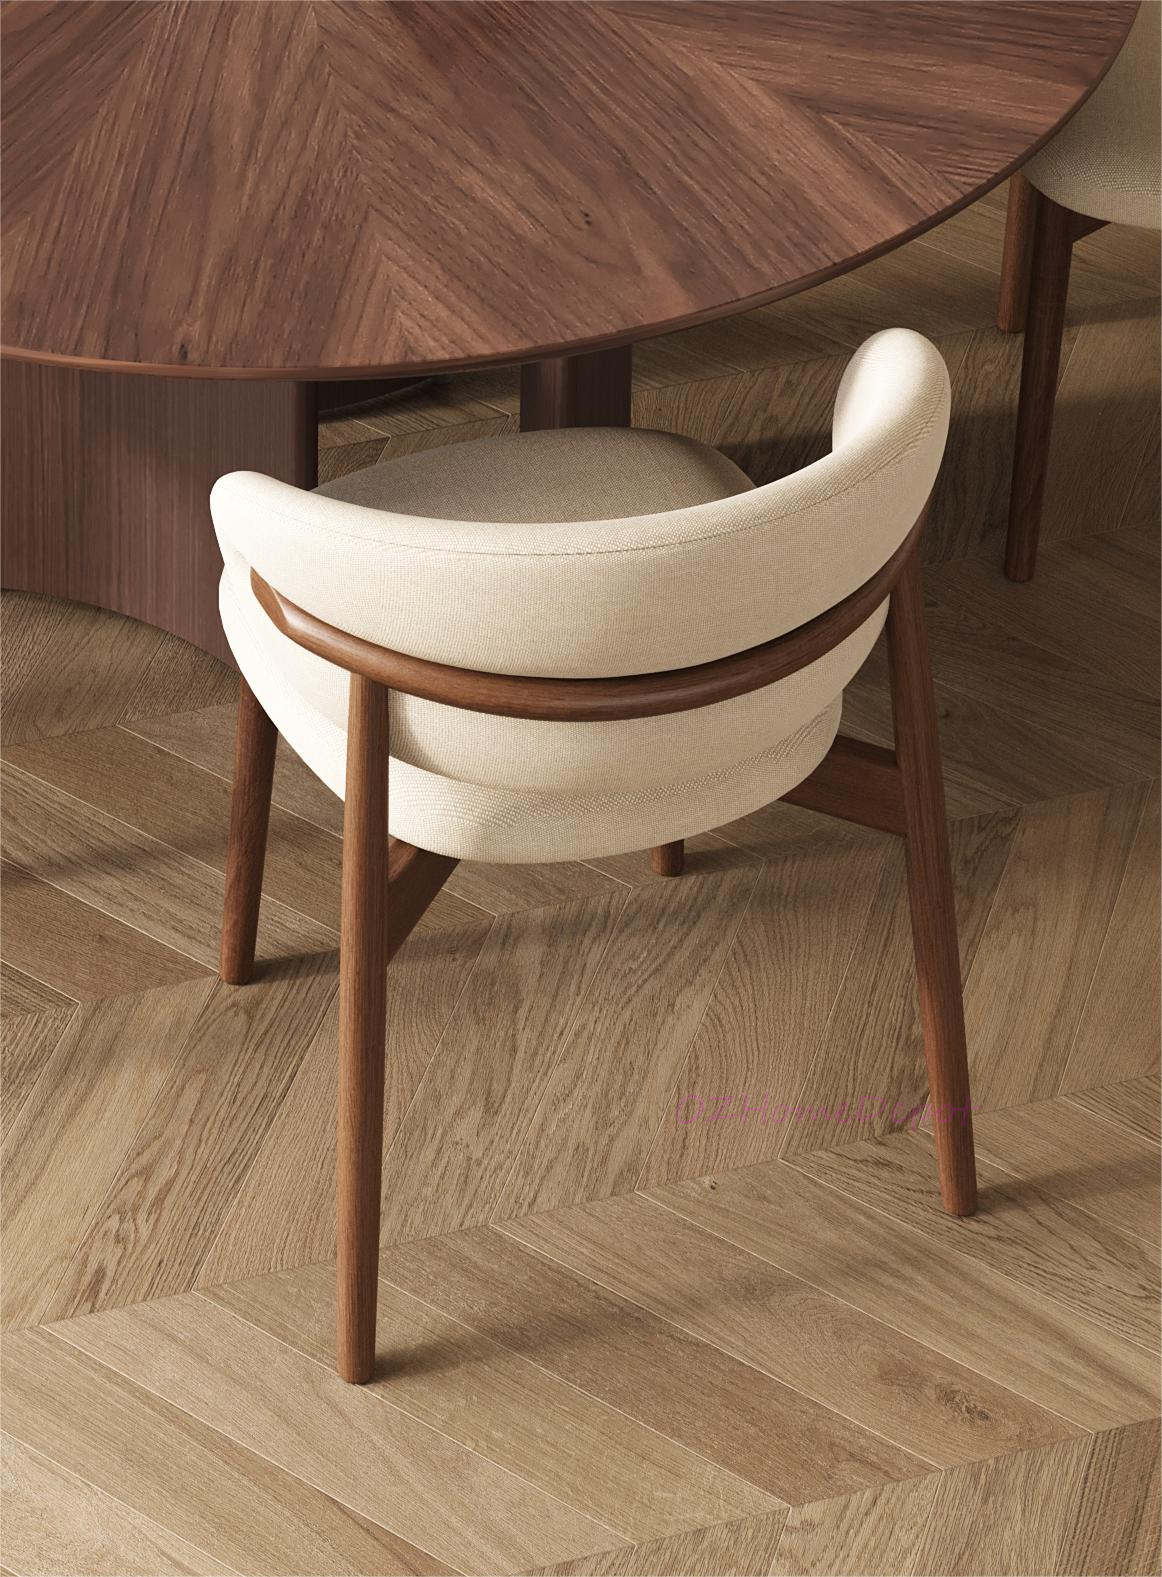 CALLIOPE Walnut Color Timber Round Style Dining Table 1.2m/1.35m